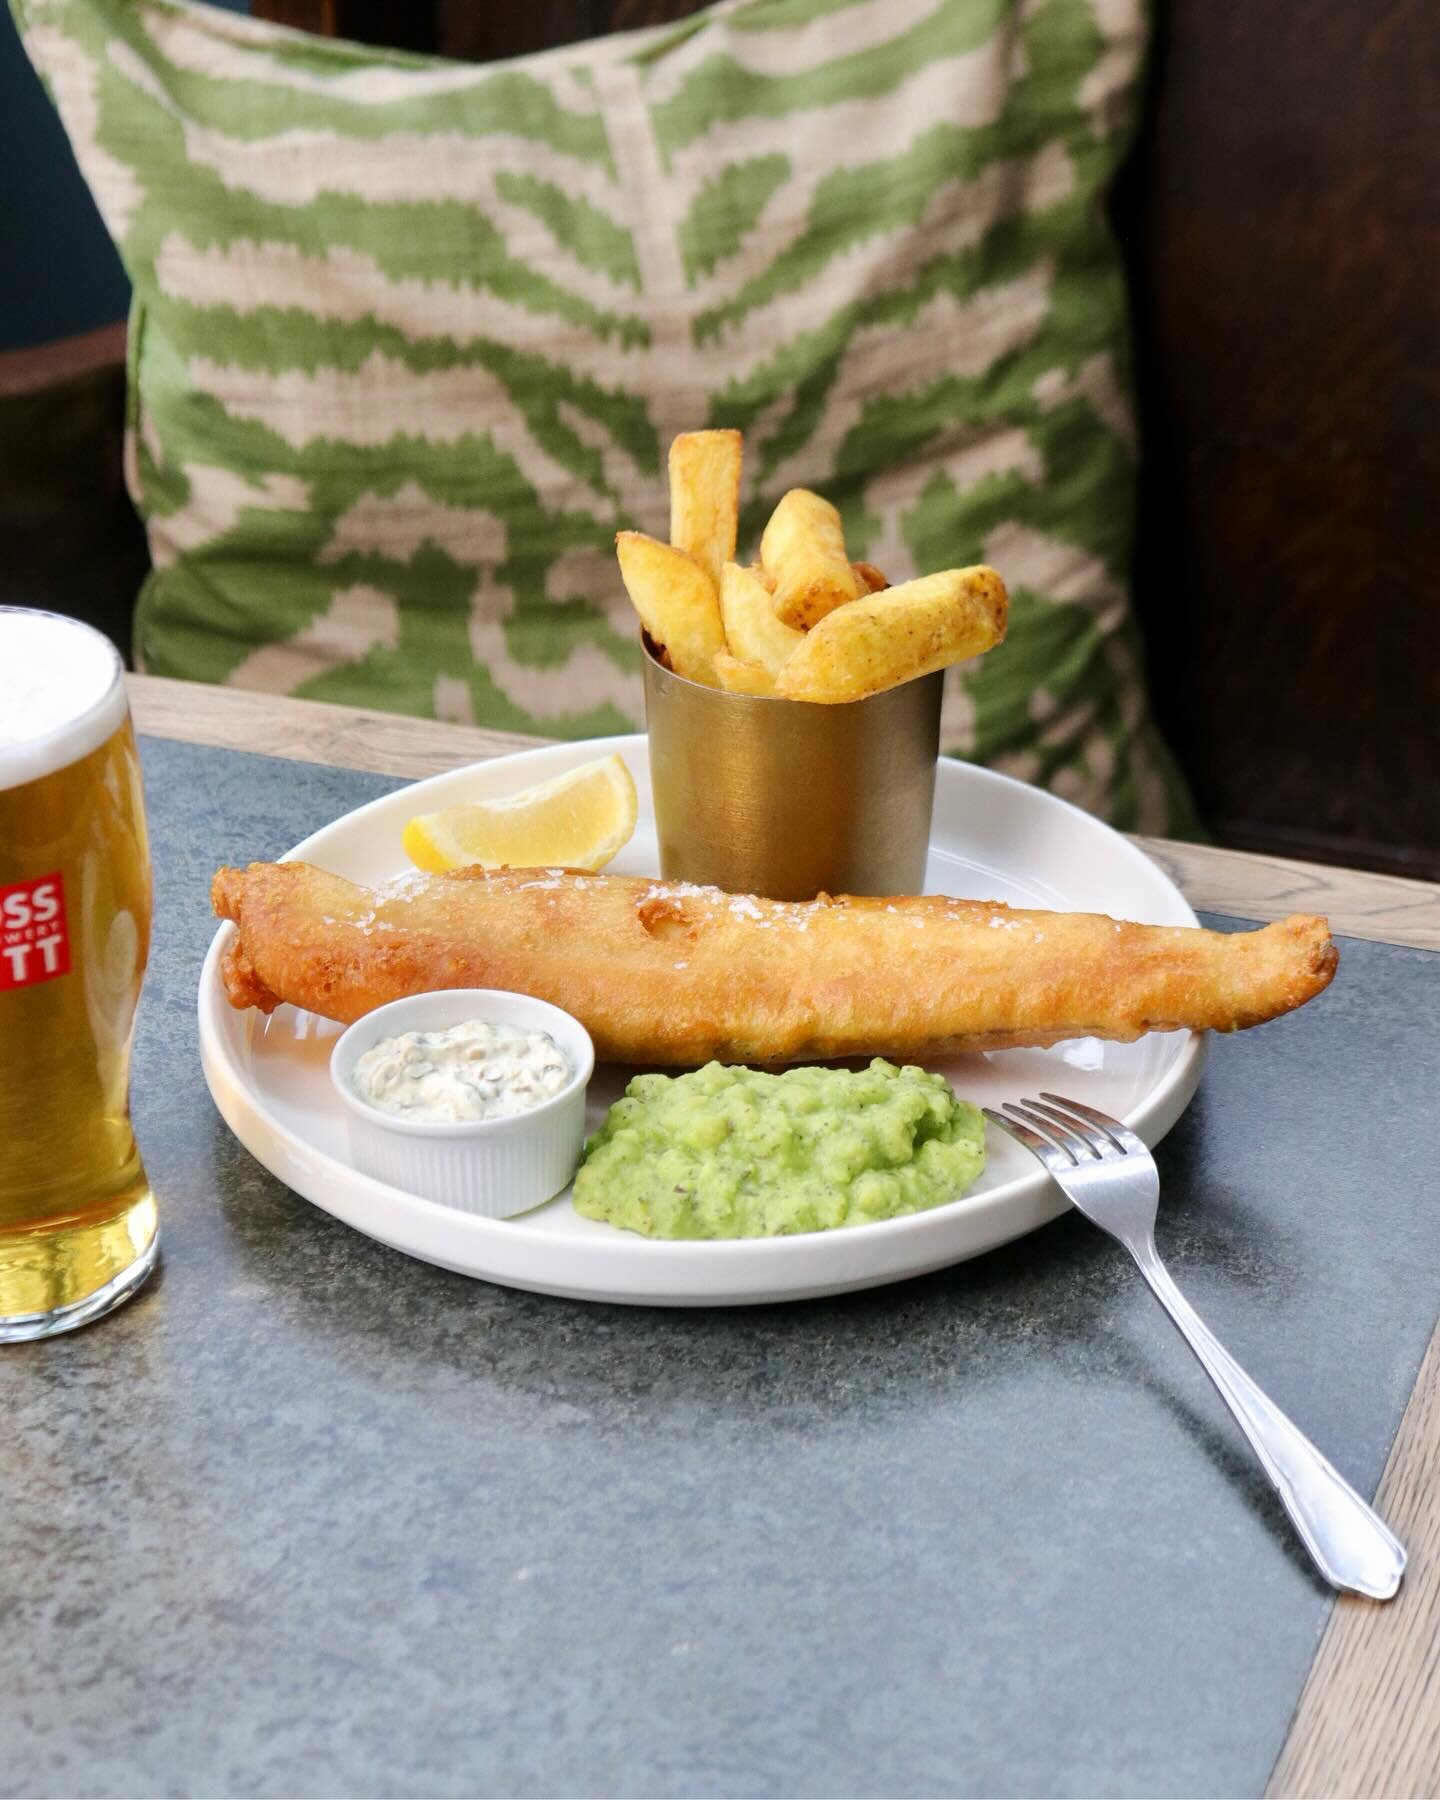 Wishing all our friends a very happy Good Friday and a great Easter weekend ❤️✨

No better way to celebrate than with a pint of our Tower Ale and our classic Fish and Chips ✨🎣